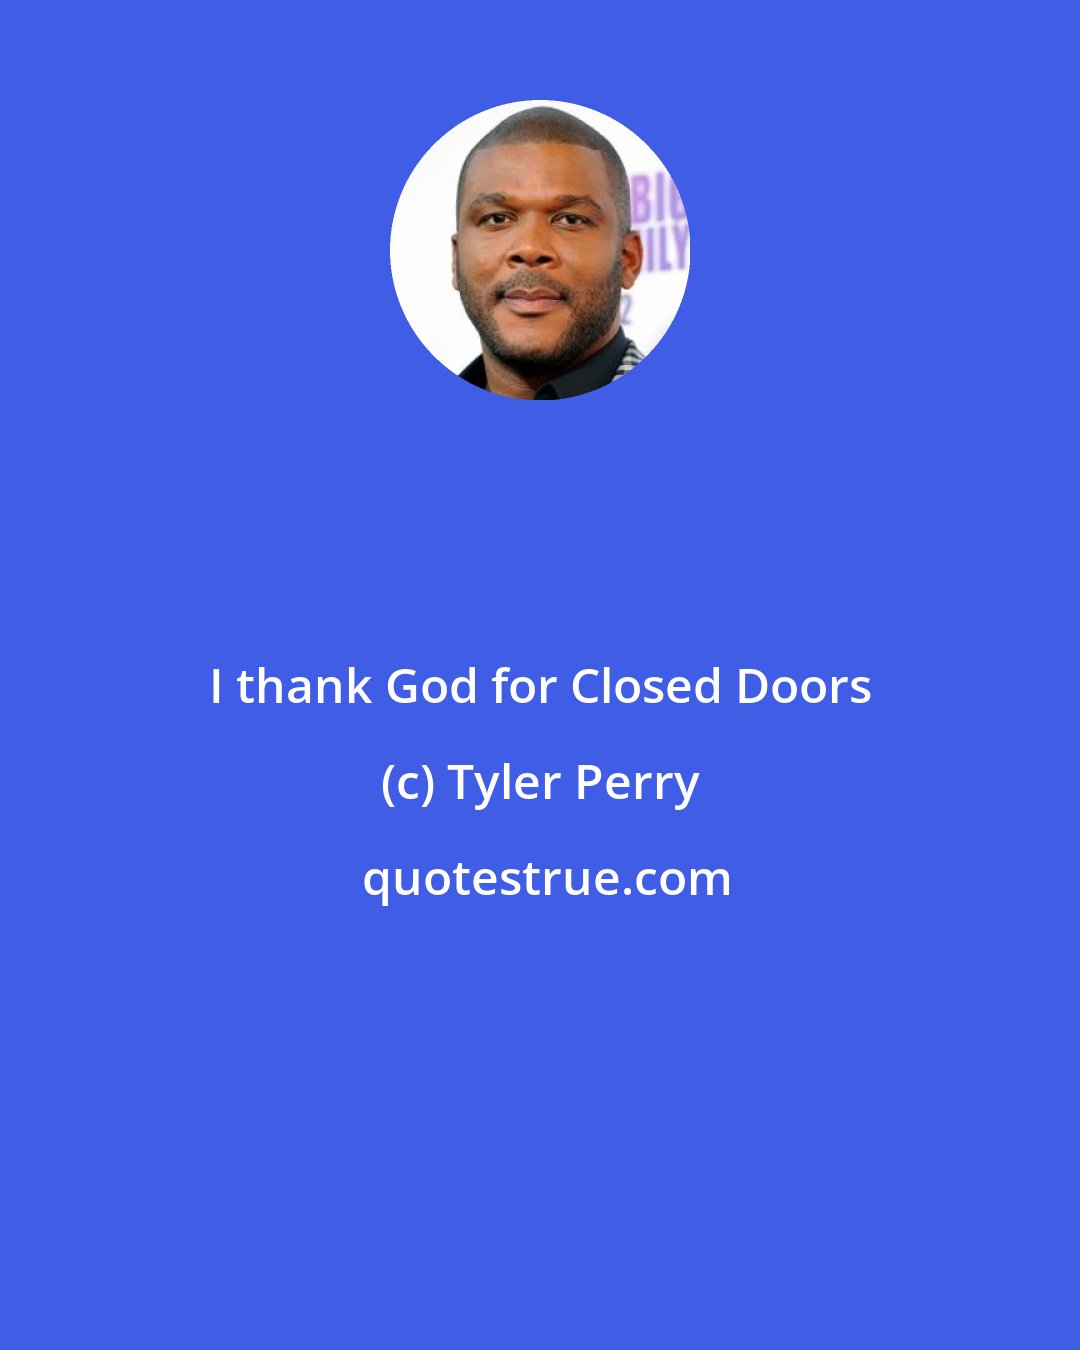 Tyler Perry: I thank God for Closed Doors